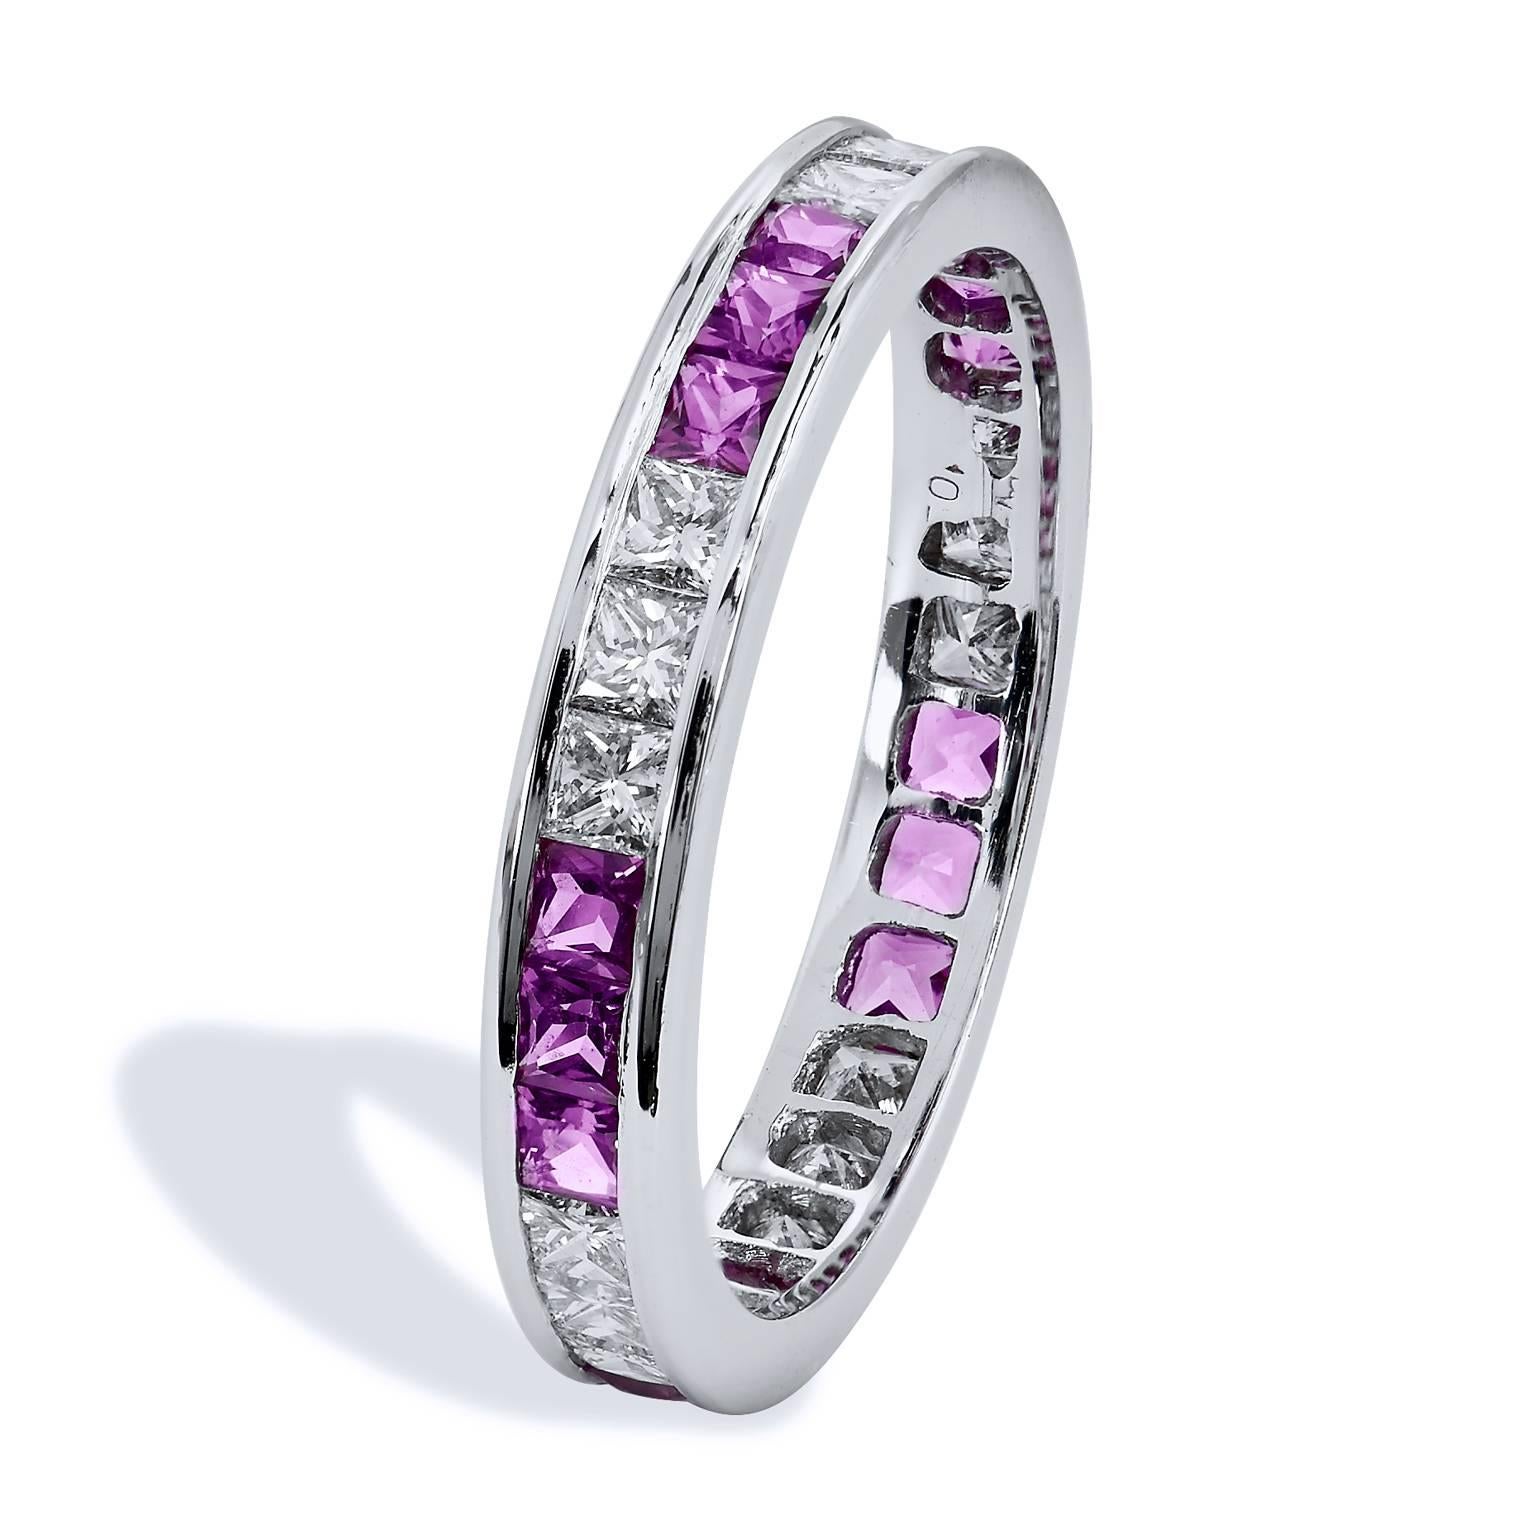 0.94 carat of Princess cut Pink sapphire and 0.77 carat of Princess cut diamond (F/G/VS) dance together in channel setting, creating a spectacular array of color. 18 karat white gold further highlights the femininity and sensuality of this size 6.5